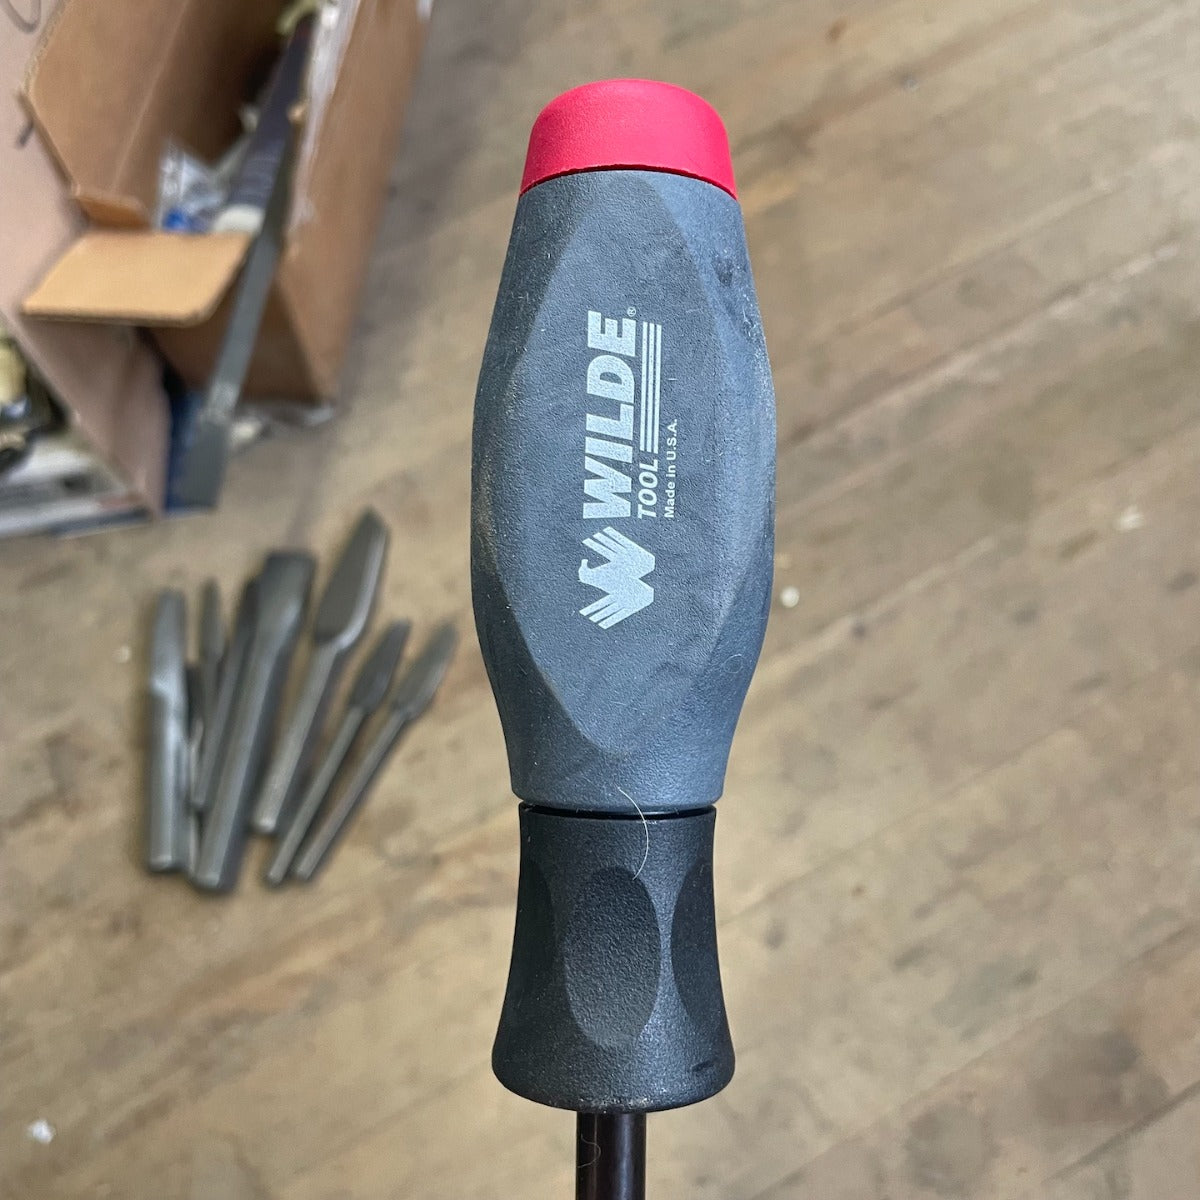 3/8" Wilde Slotted Screwdriver 12" Blade - 17 1/2" Overall